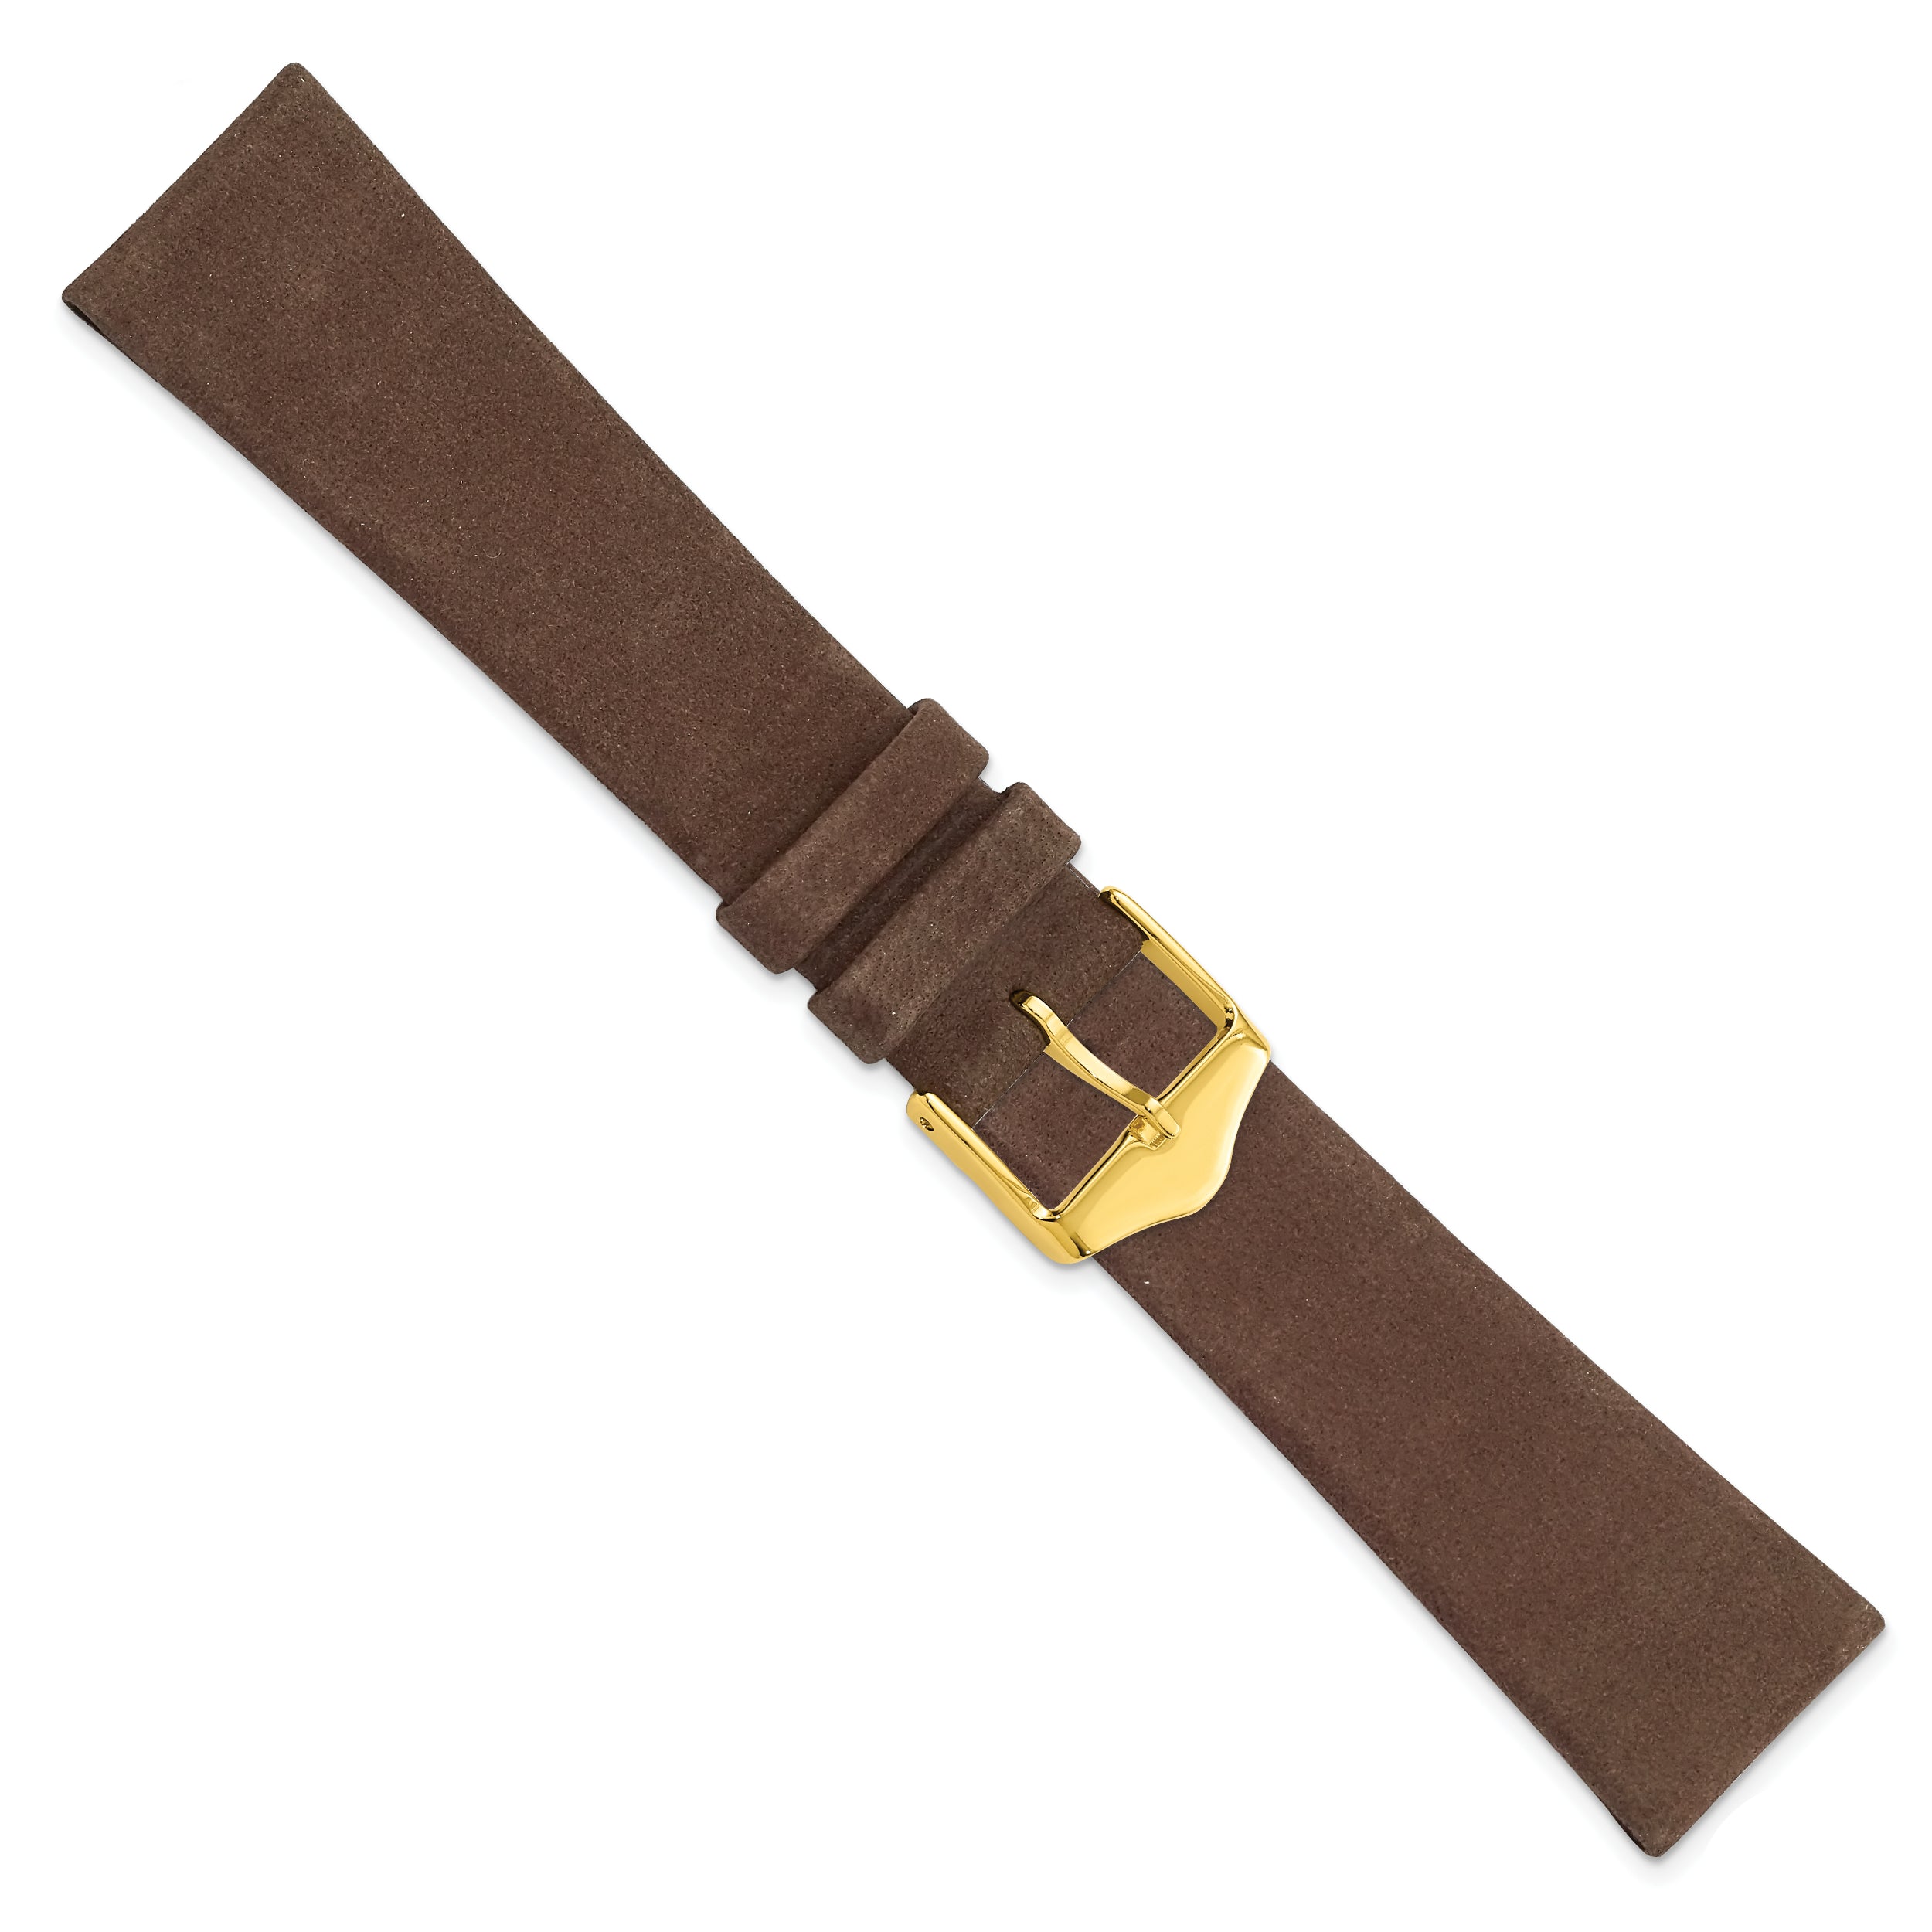 12mm Dark Brown Suede Flat Leather with Gold-tone Buckle 6.75 inch Watch Band